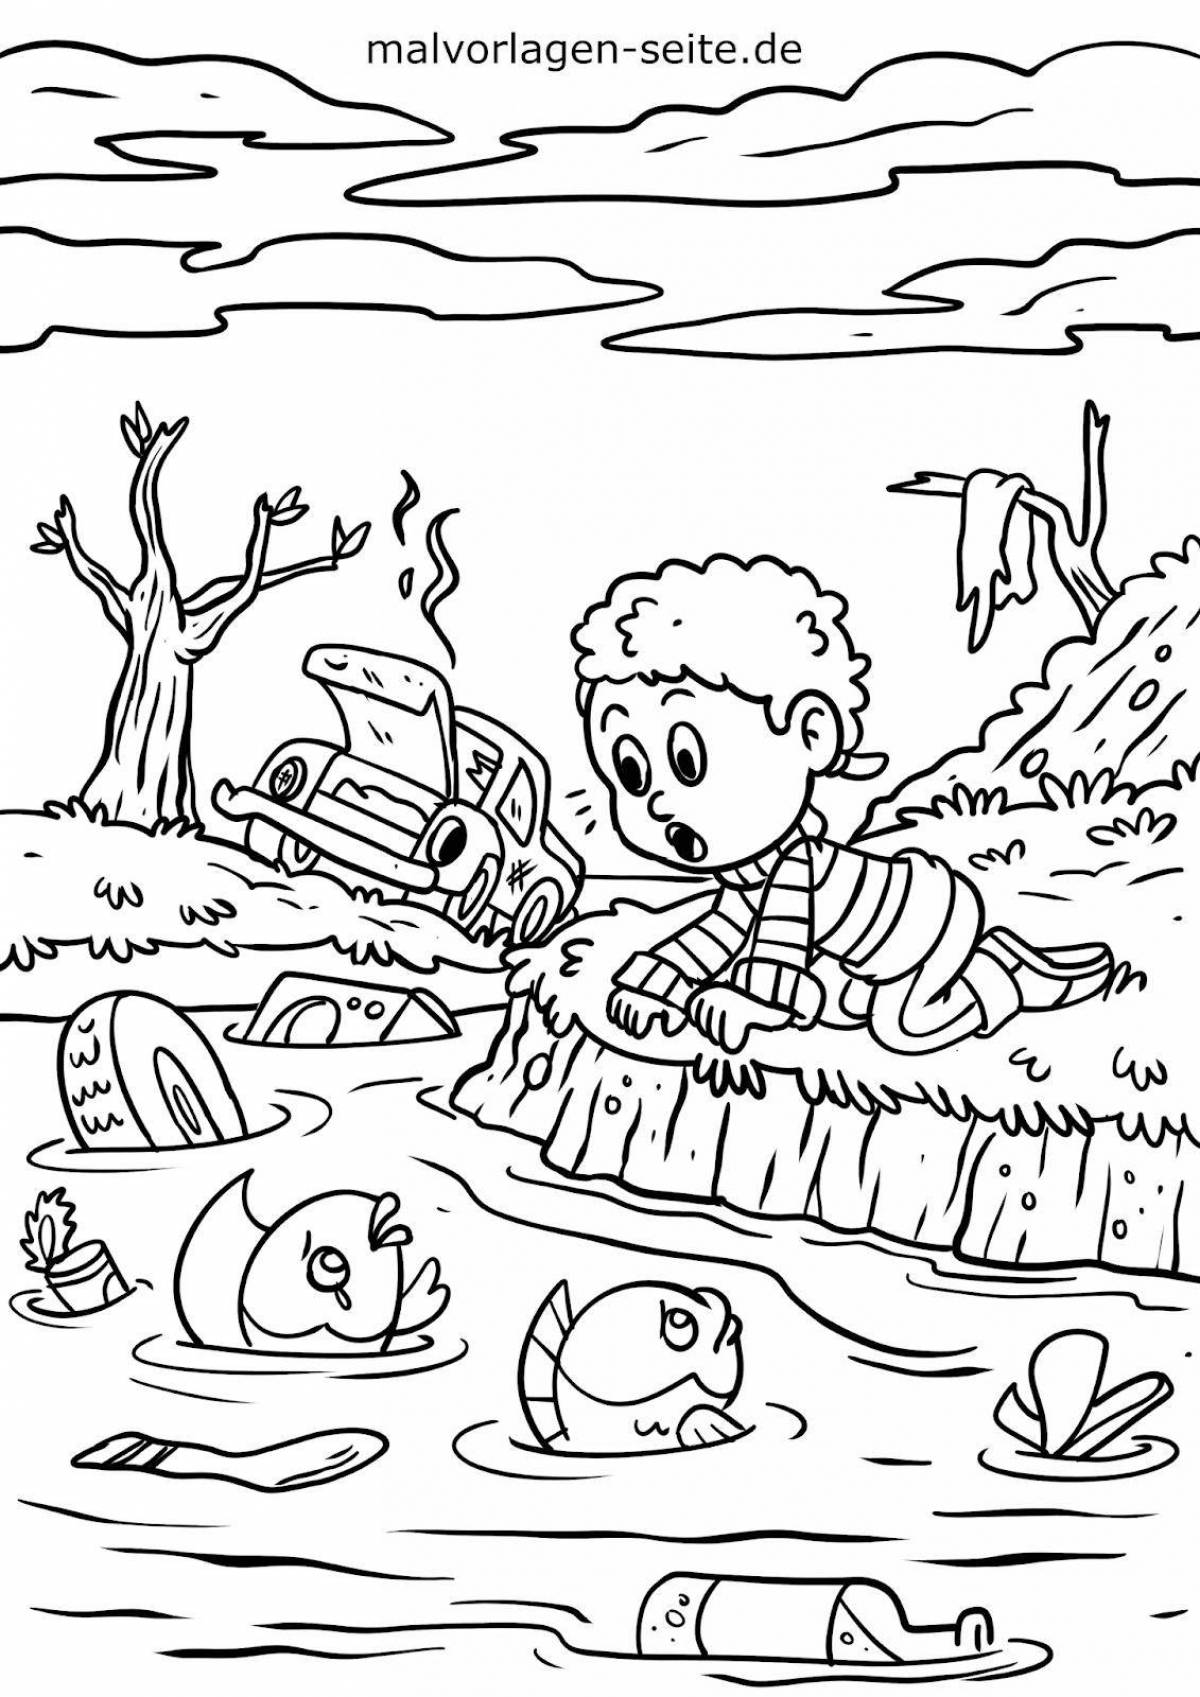 Bright eco coloring book for kids